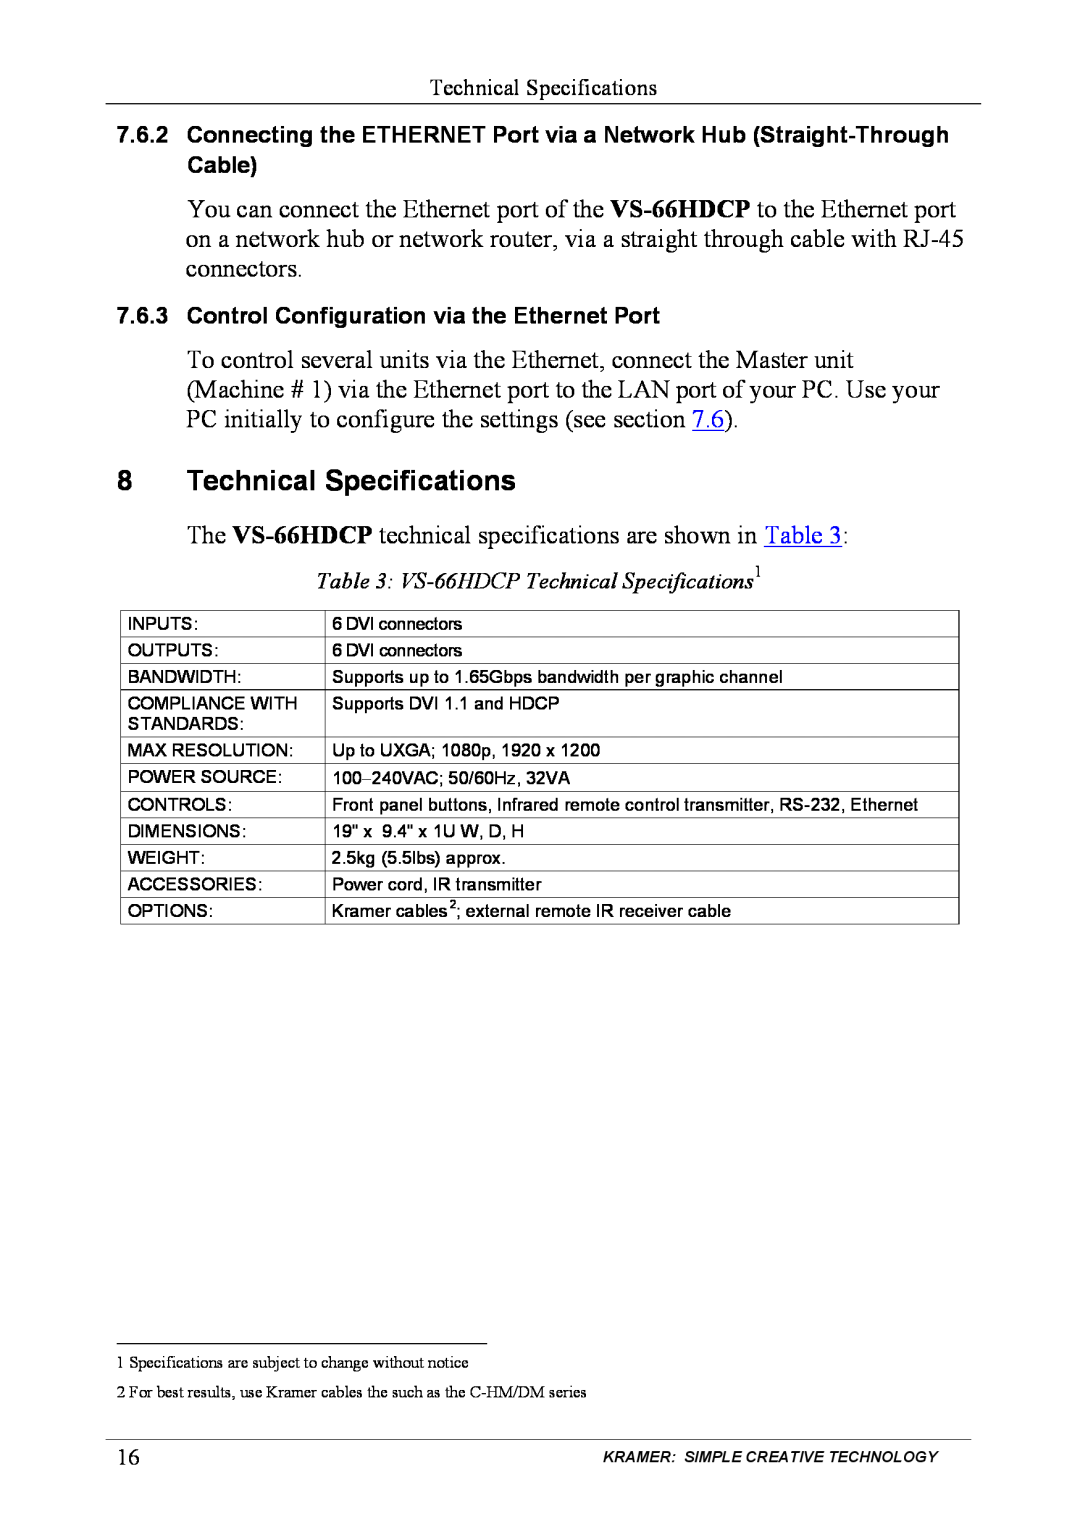 Kramer Electronics VS-66hdcp user manual Technical Specifications 